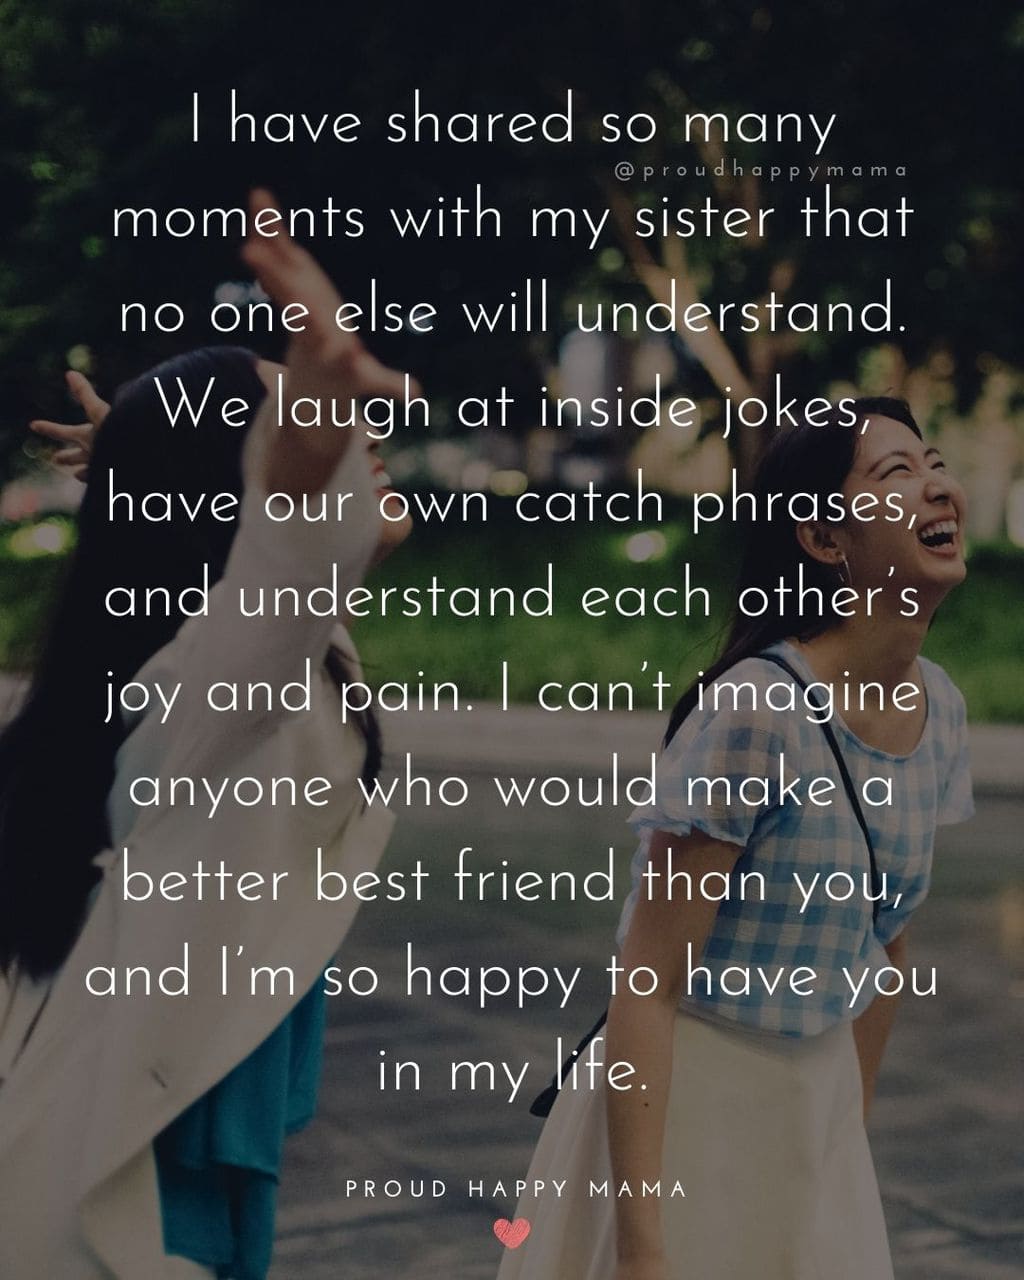 Sister Quotes - I have shared so many moments with my sister that no one else will understand. We laugh at inside jokes, have our own catch phrases, and understand each others joy and pain